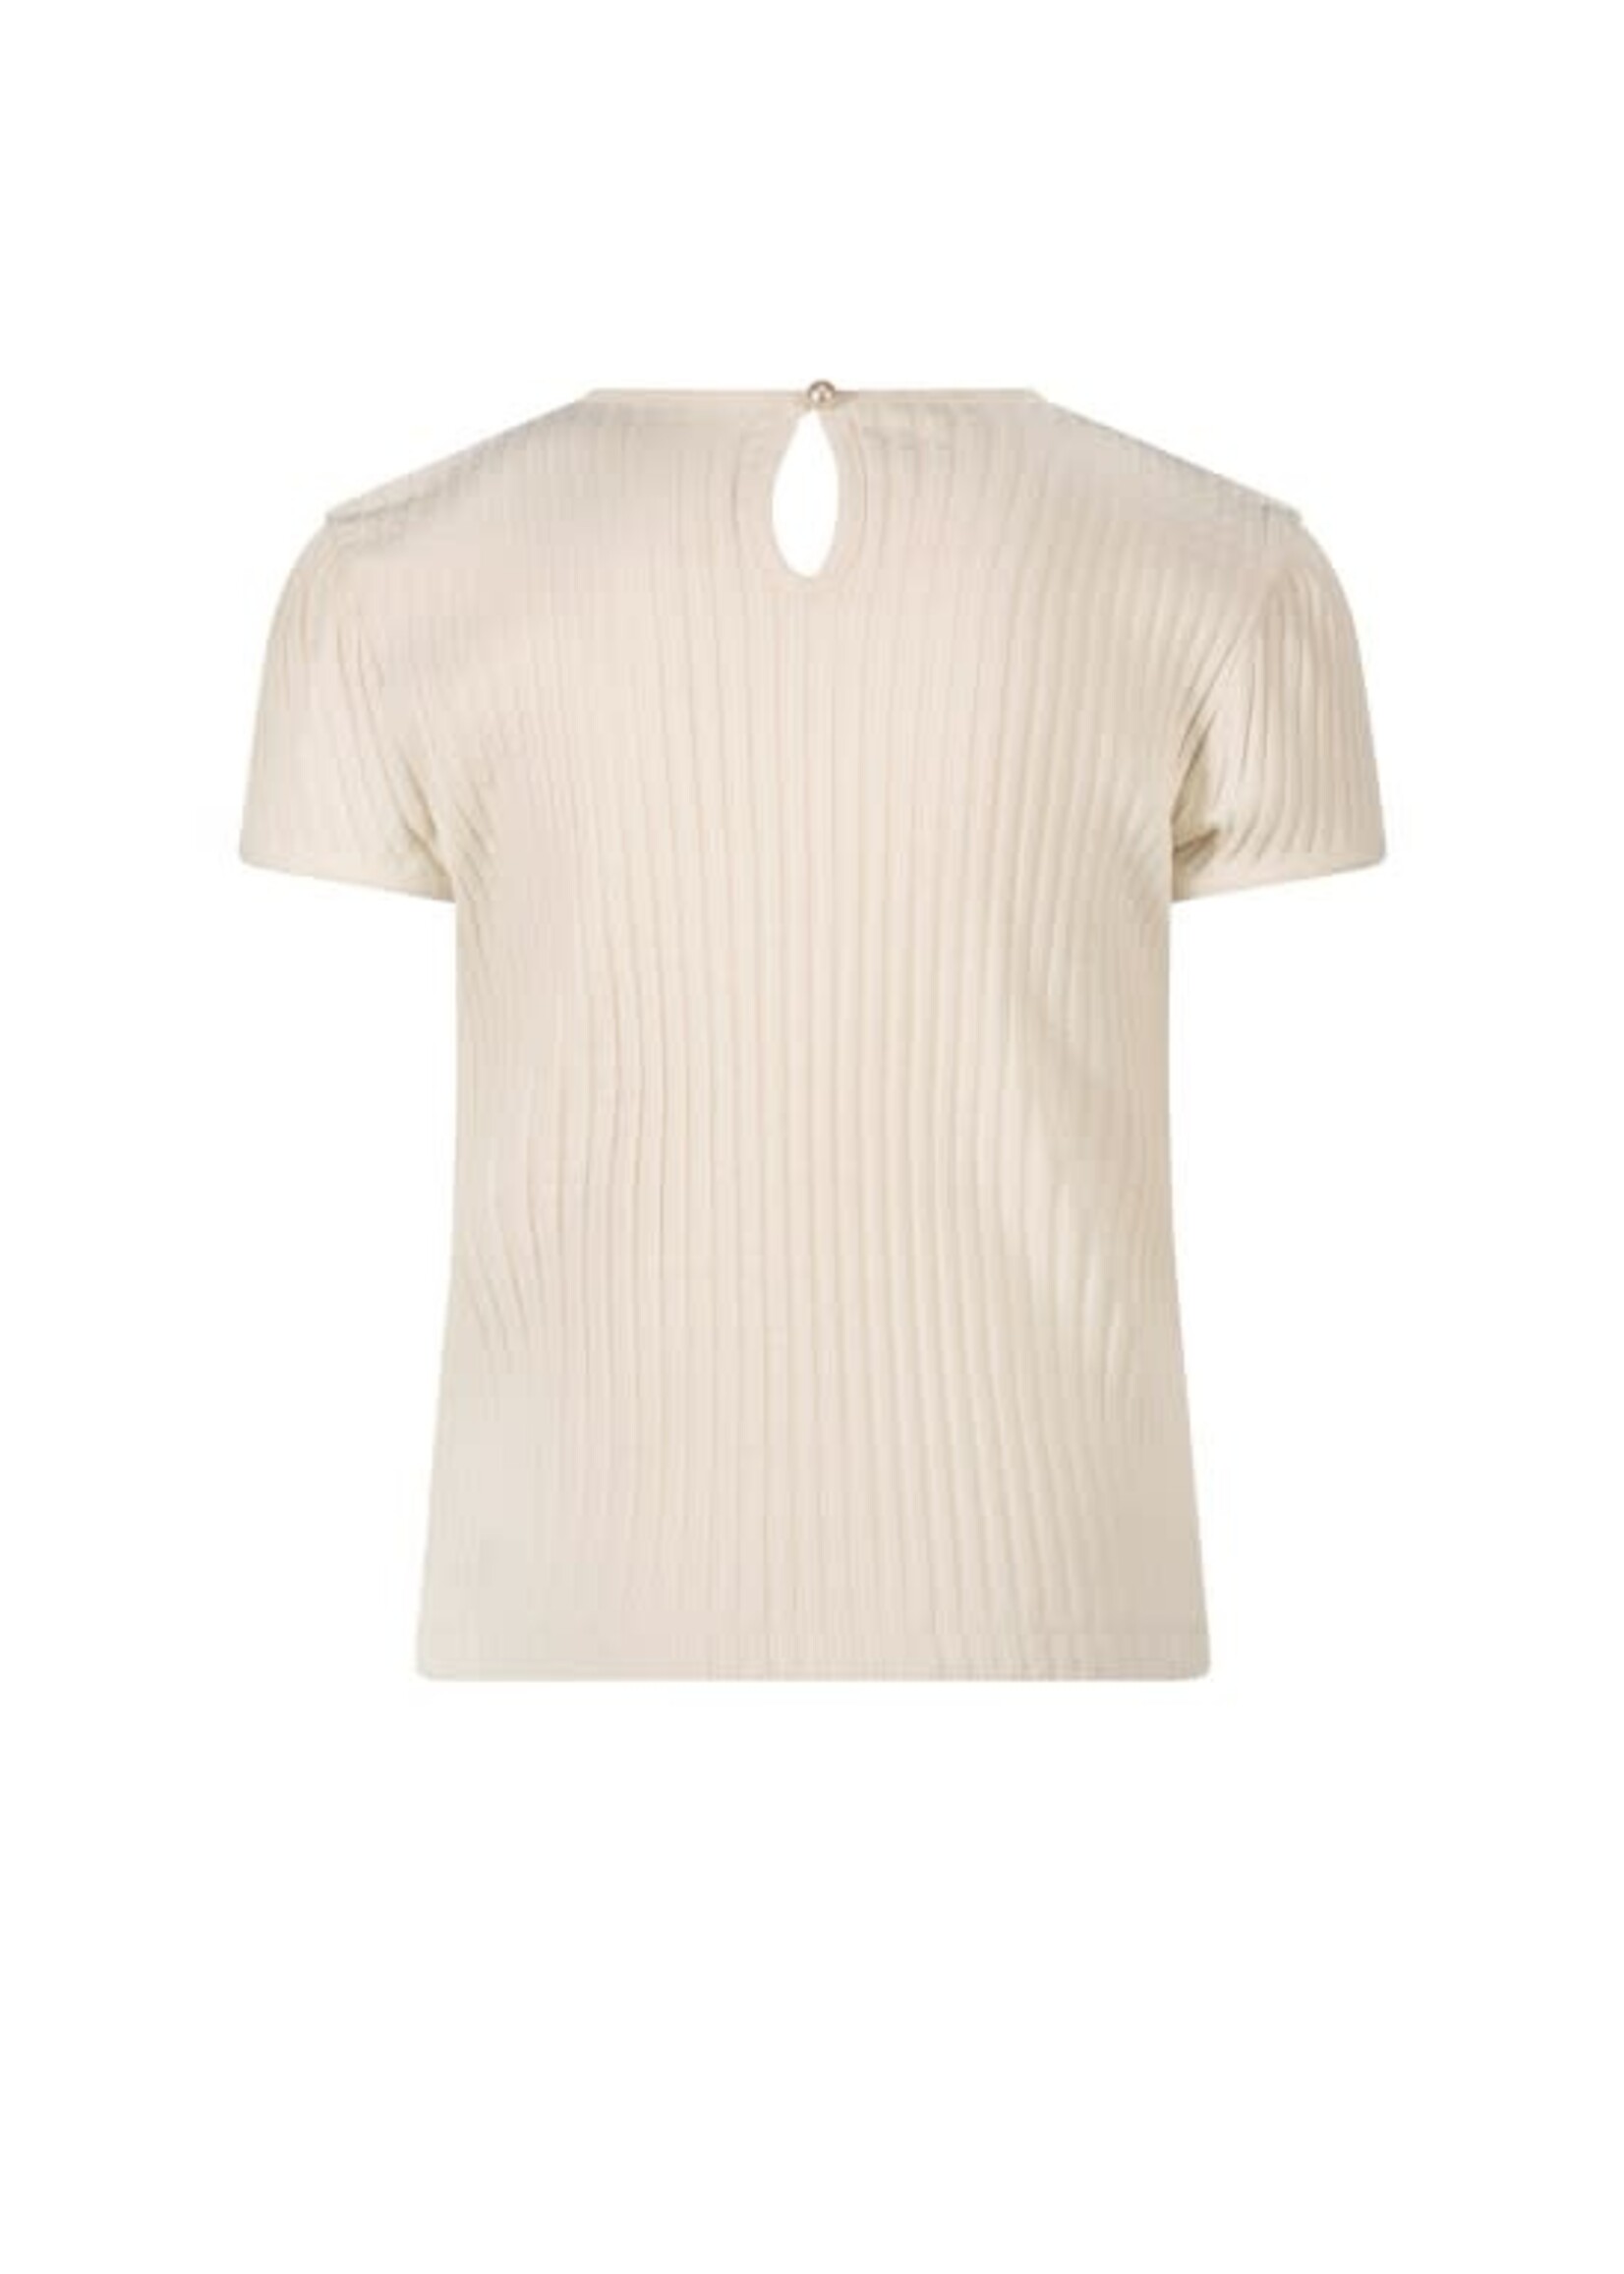 Le Chic Le Chic NARLY summer cableknit T-shirt C312-5408 Oatmeal Elite